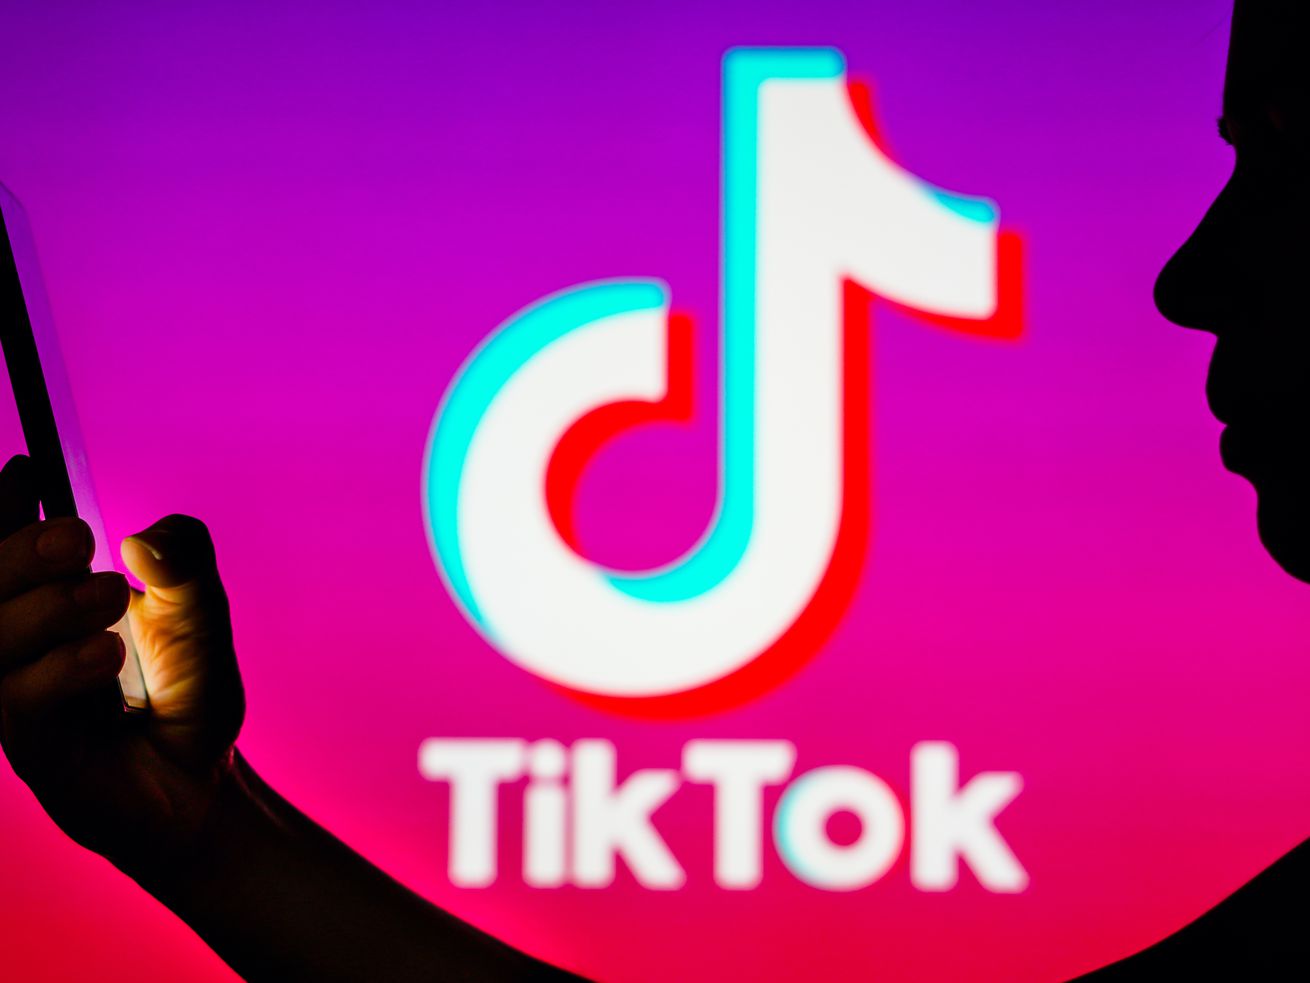 In this photo illustration, a woman’s silhouette holds a smartphone with the TikTok logo in the background.